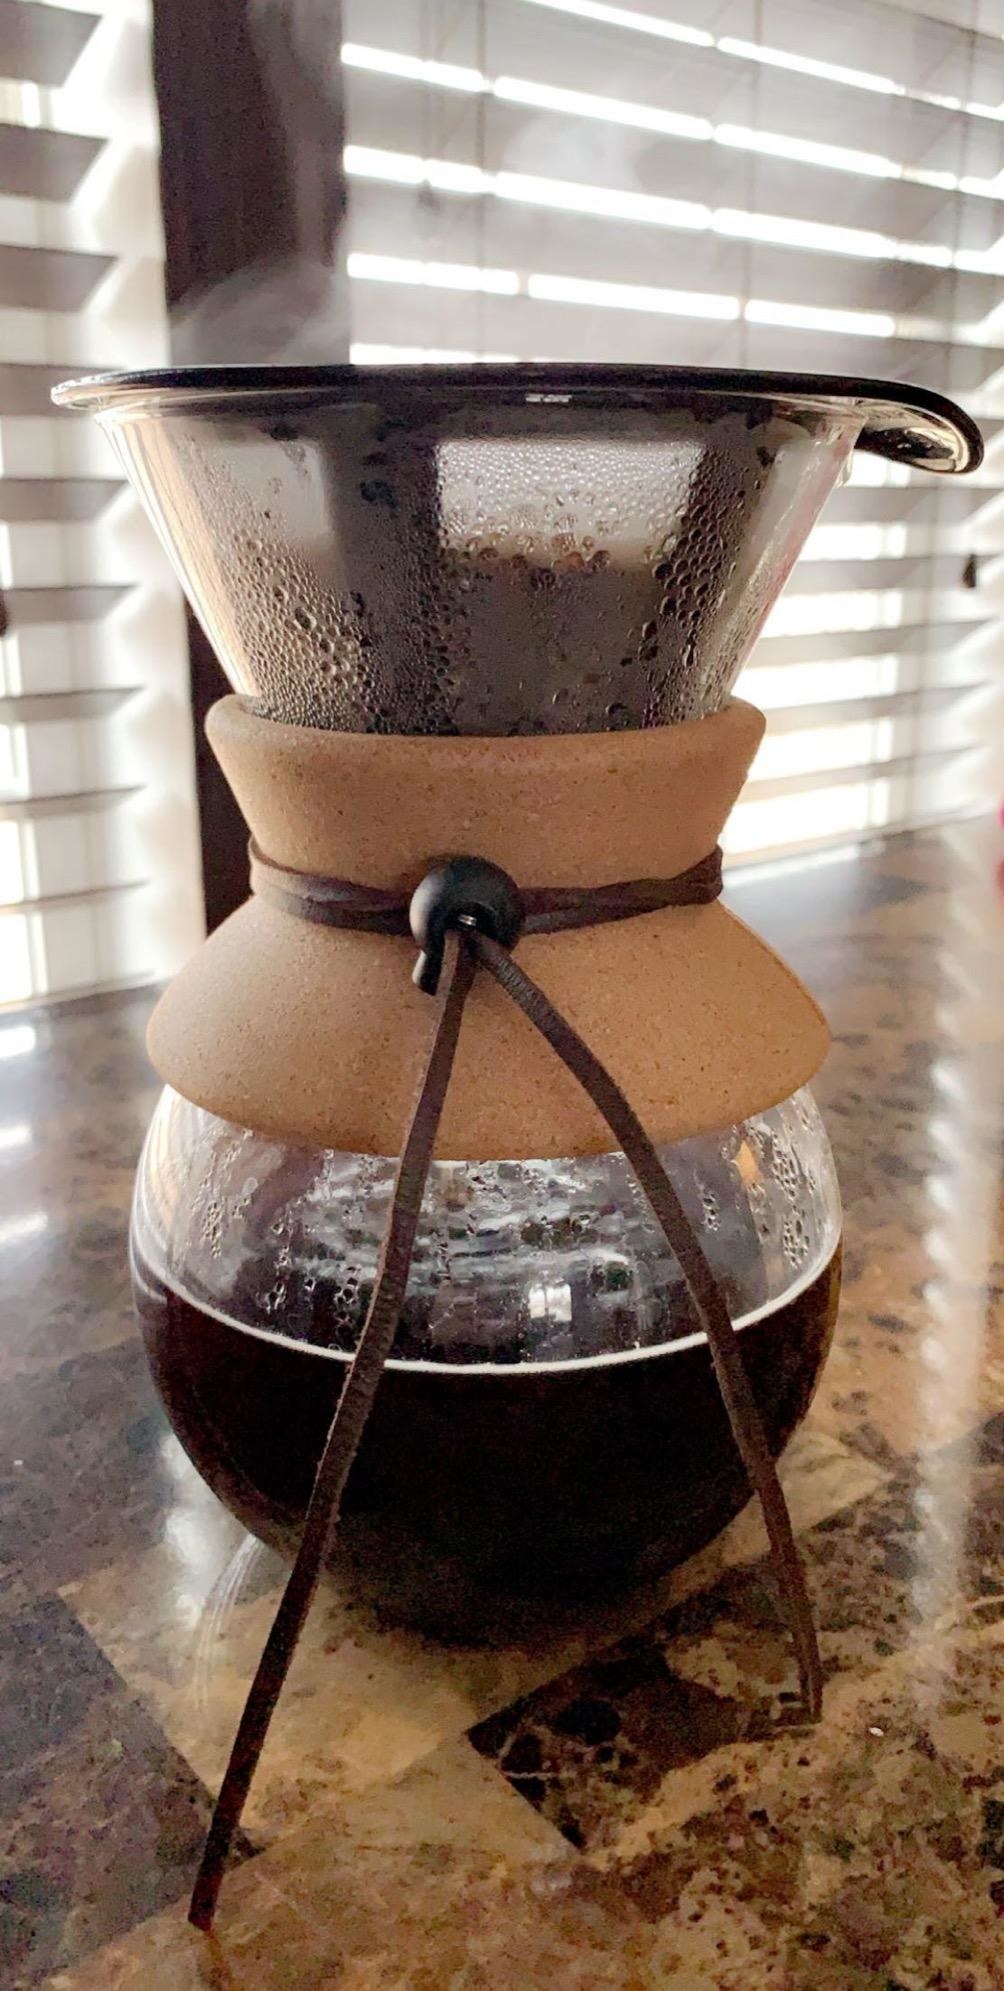 Reviewer photo of their pour over coffee maker filled with hot coffee